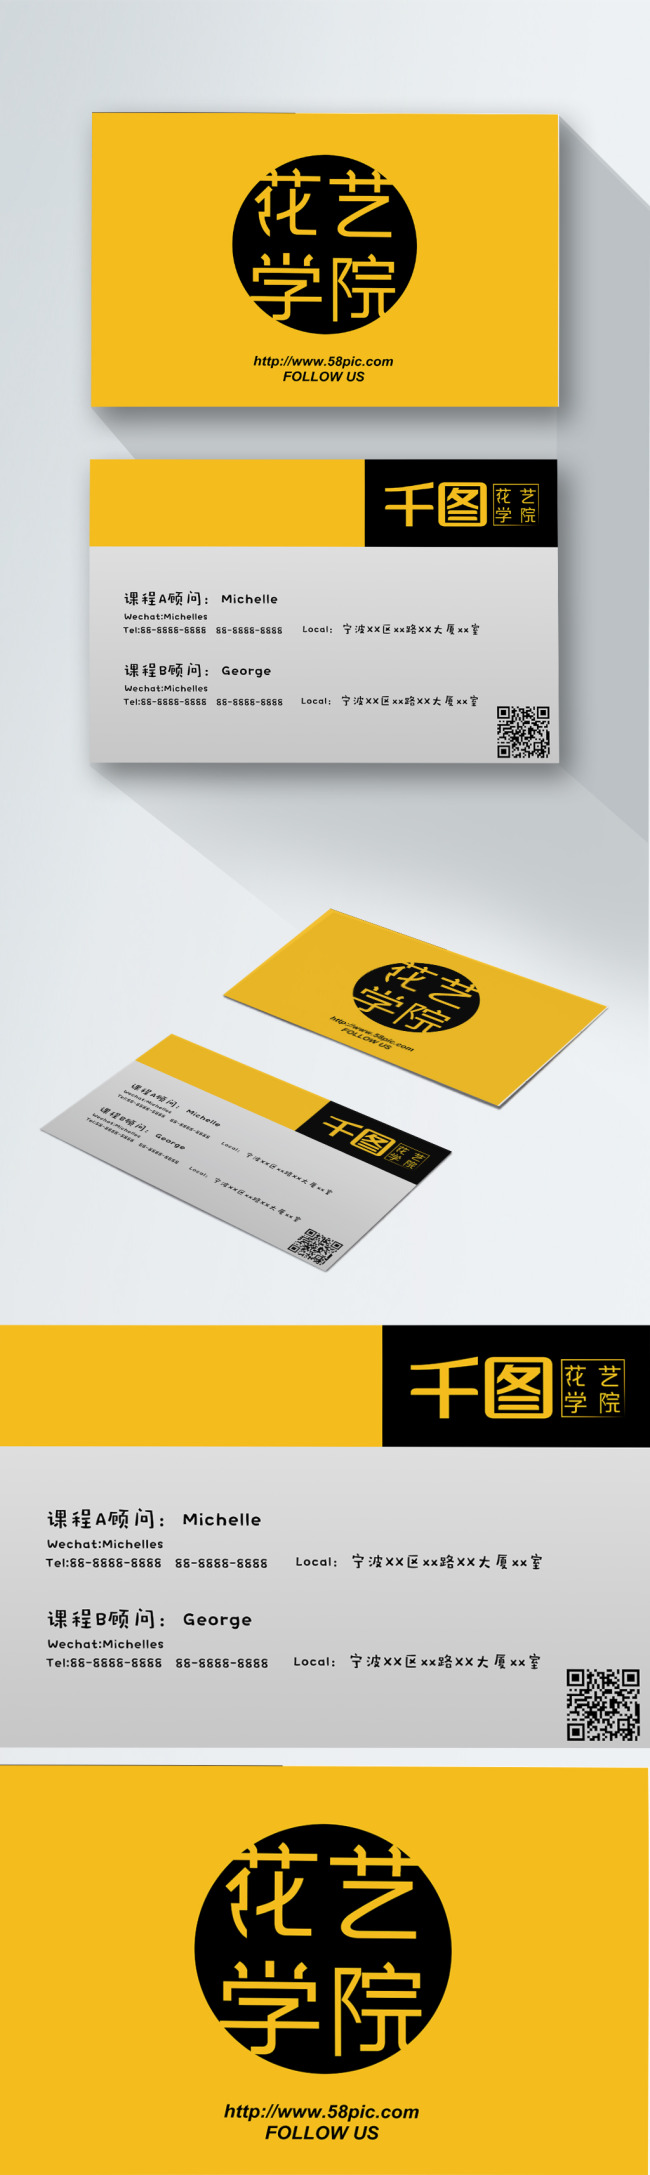 Download Business Card Of Creative Yellow Fried Egg Template Image Picture Free Download 400139752 Lovepik Com Yellowimages Mockups